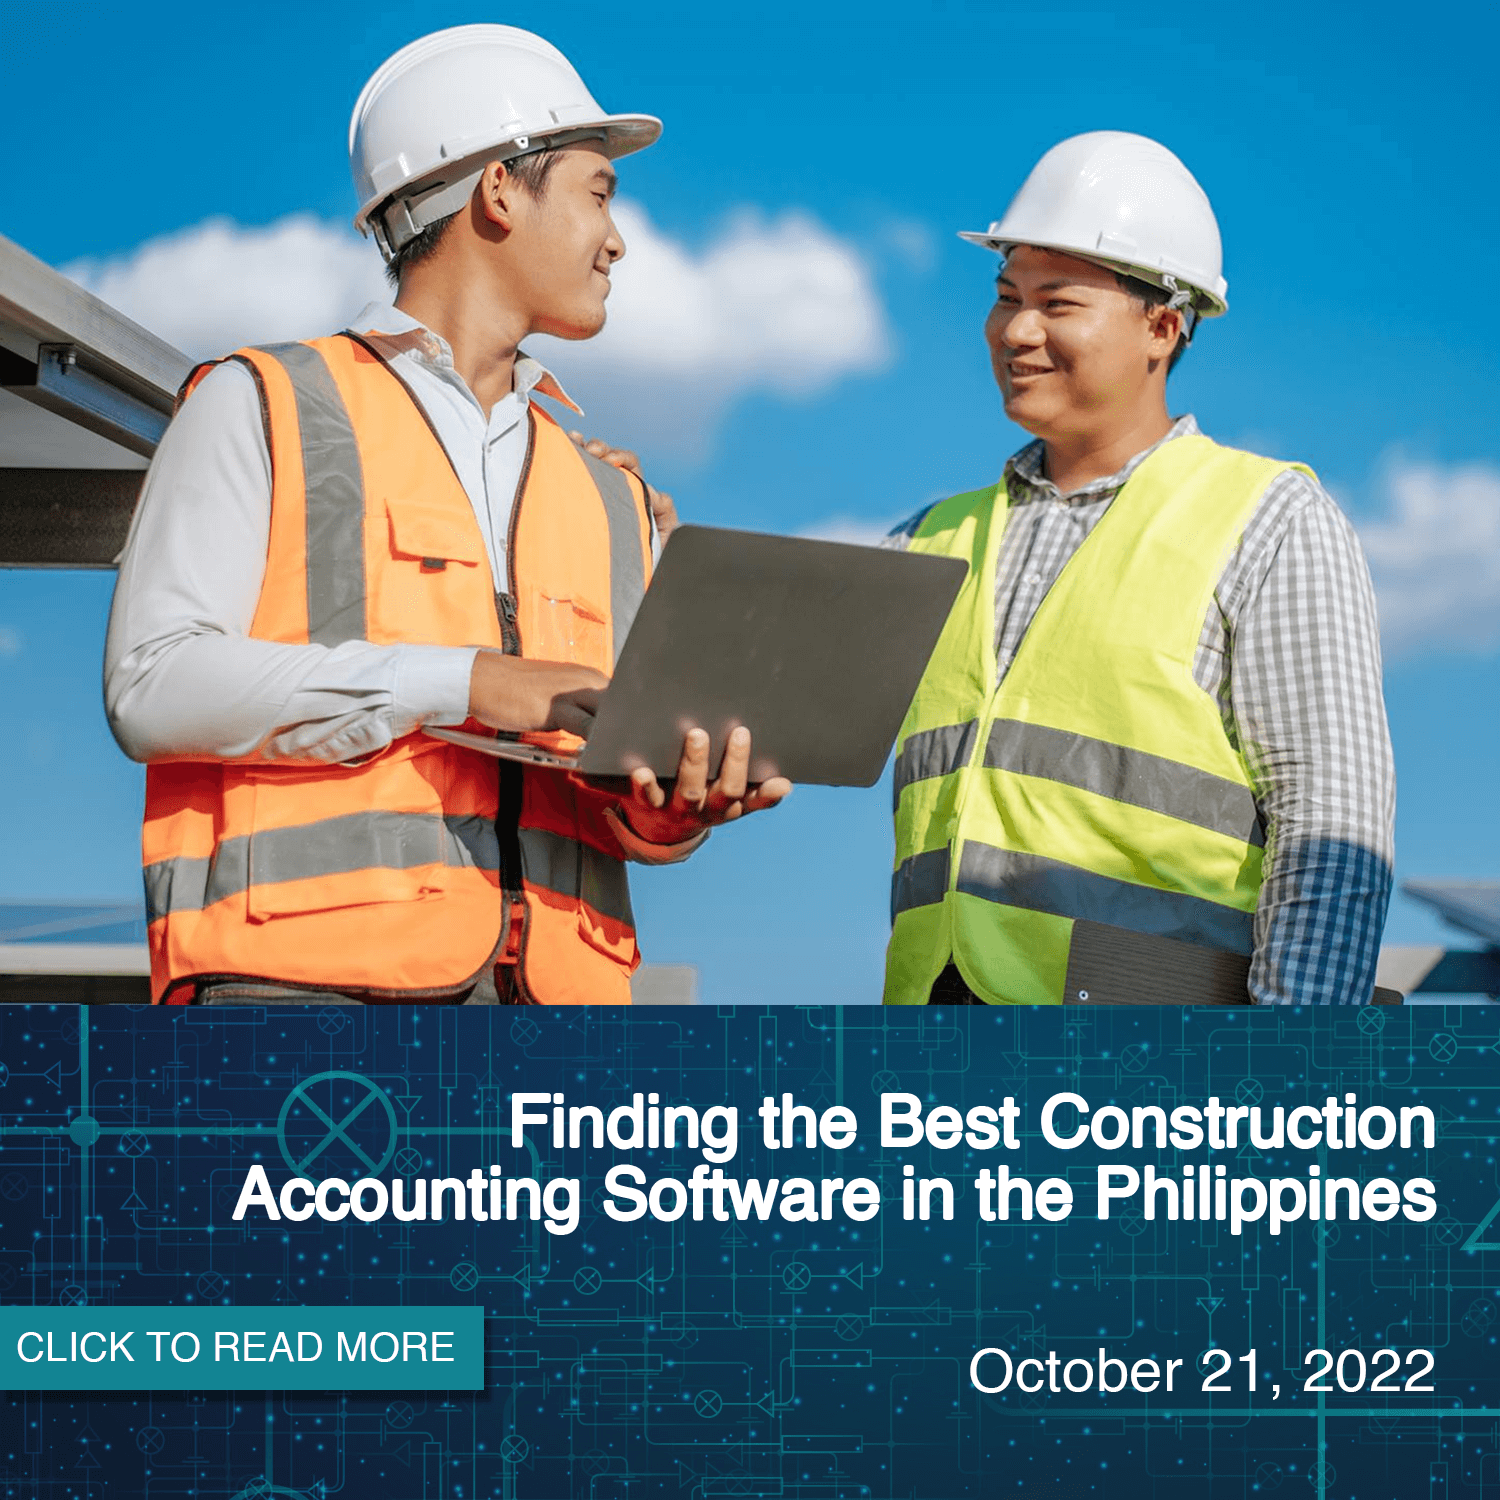 Finding the Best Construction Accounting Software in the Philippines